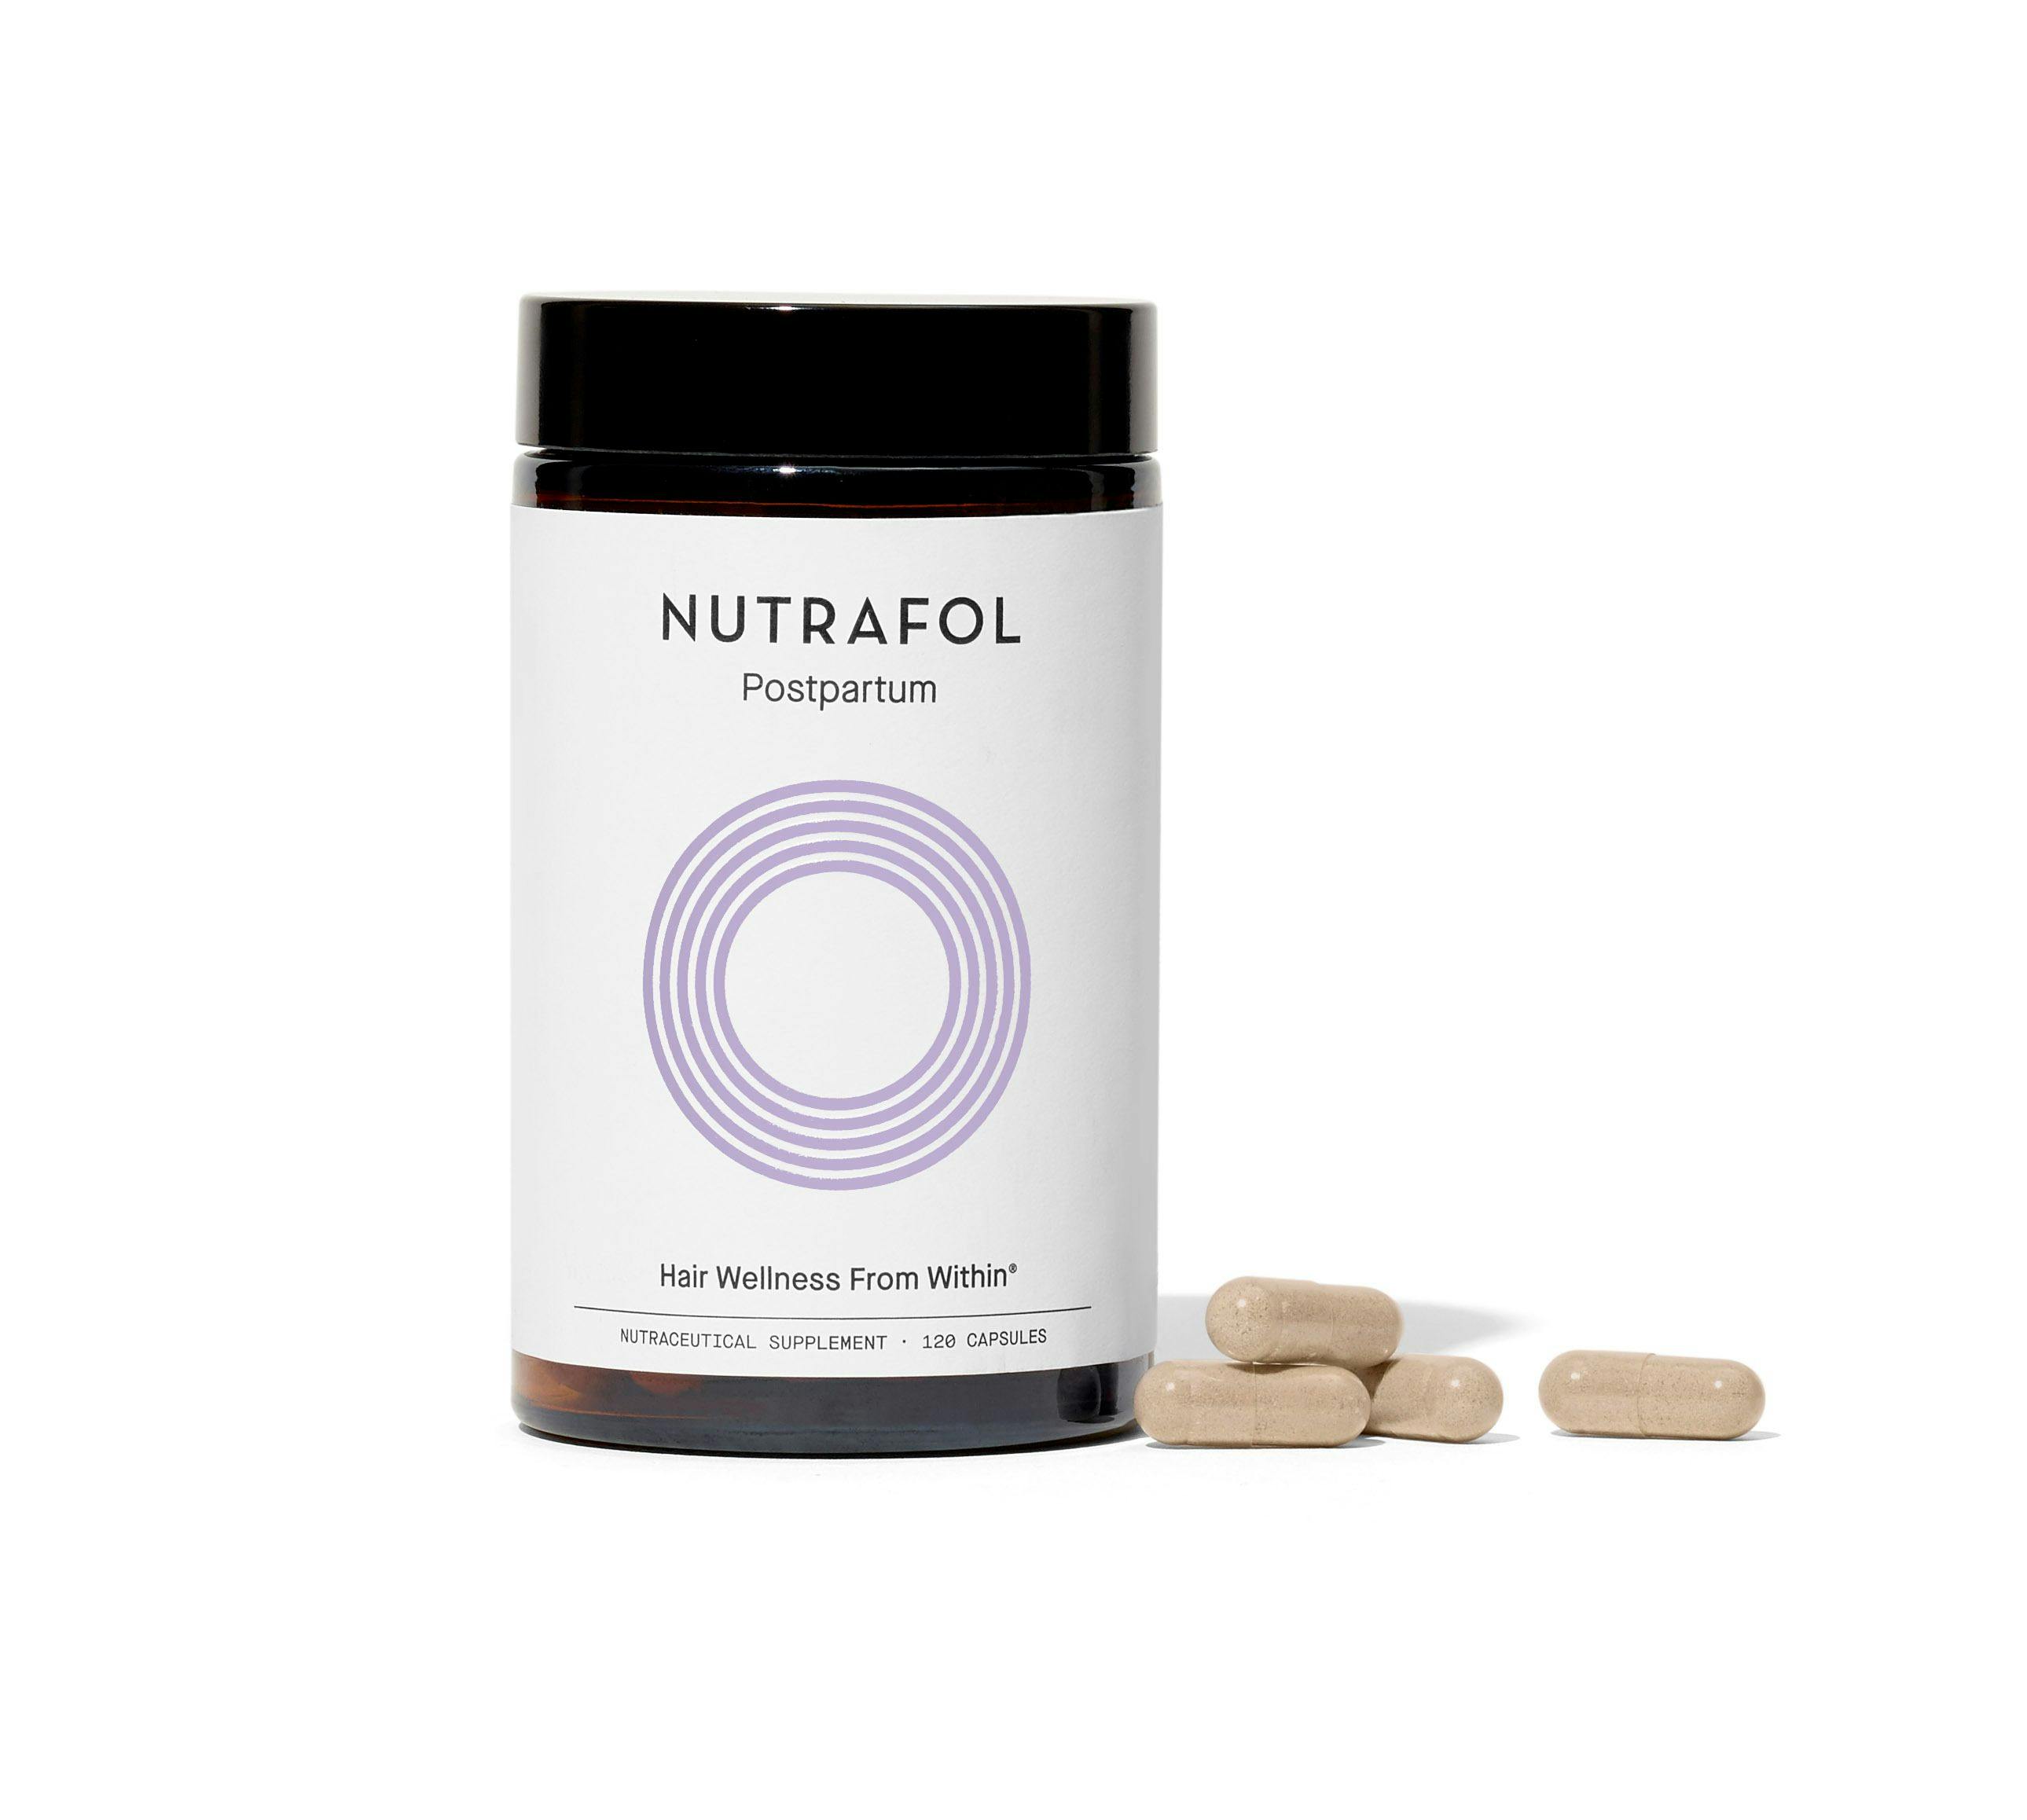 Nutrafol Launches Postpartum Nutraceutical